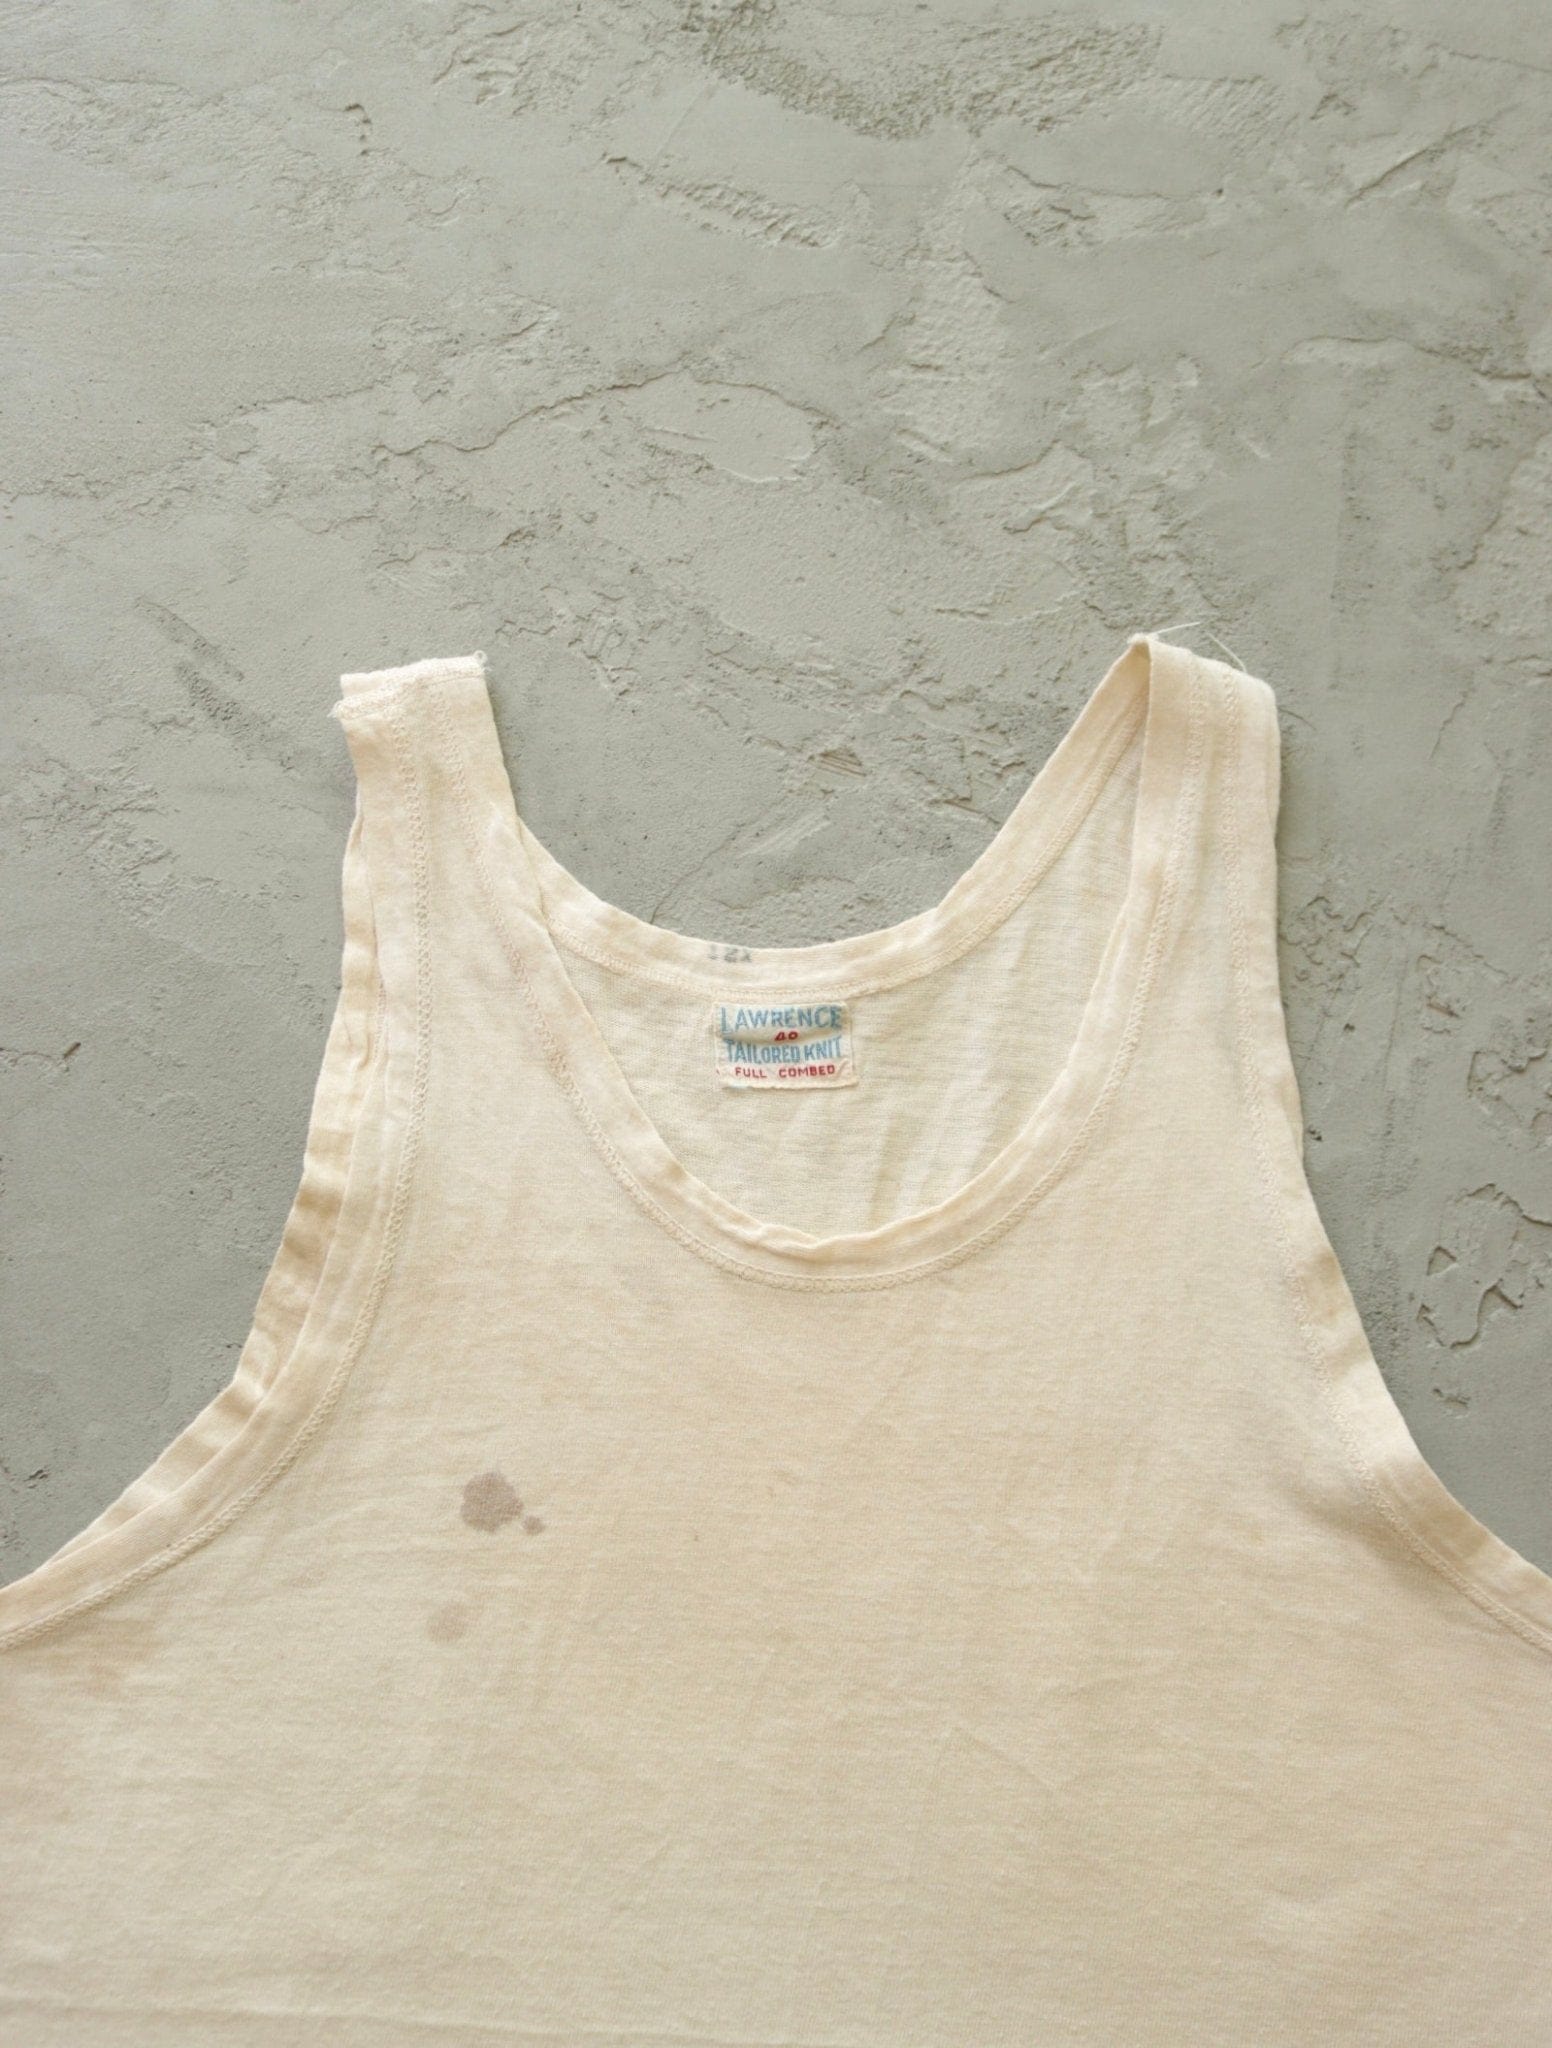 1930S LAWRENCE TANK TOP - TWO FOLD